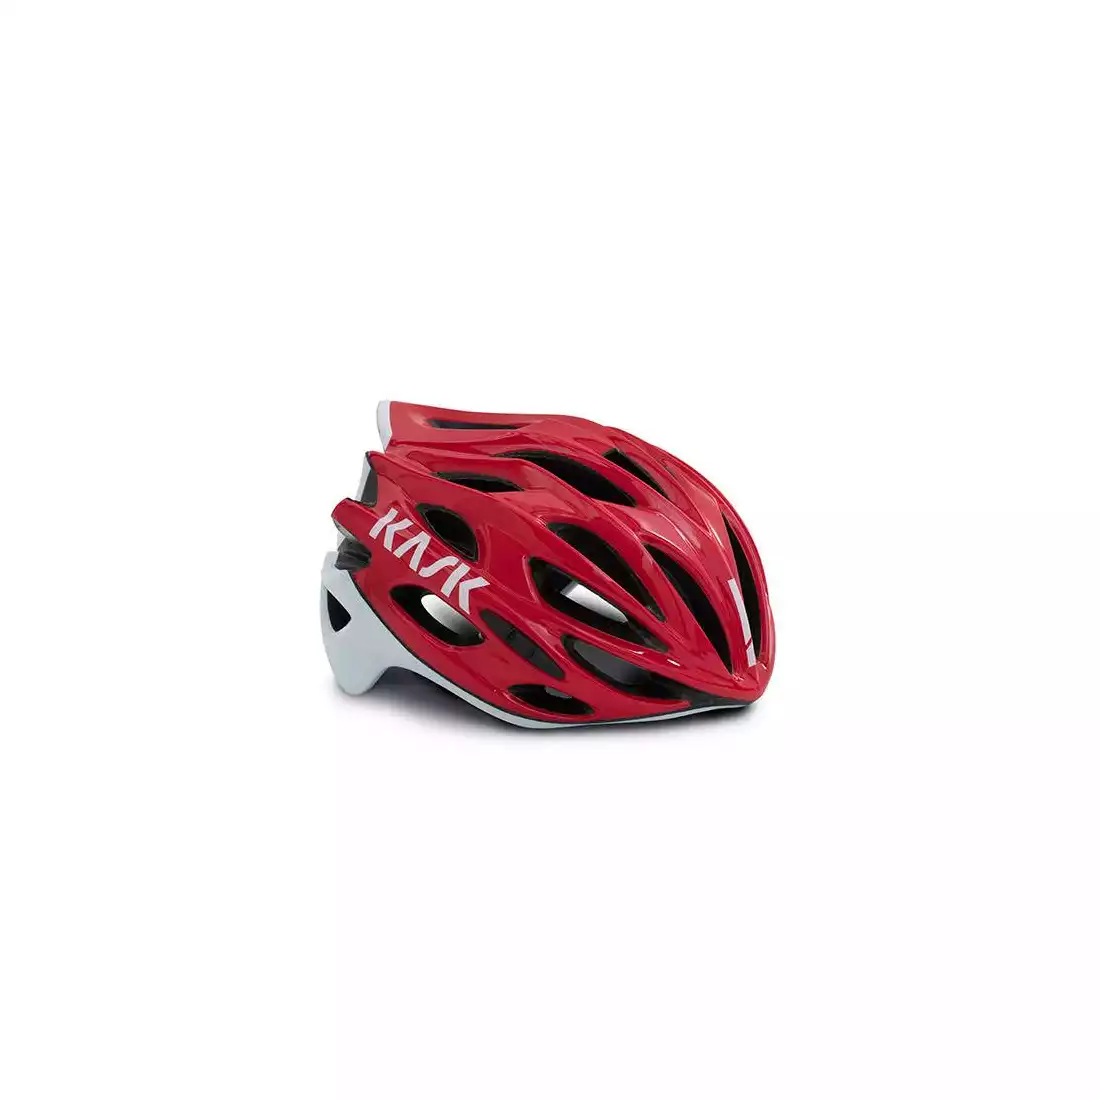 KASK MOJITO X - kask rowerowy CHE00053.243 red white